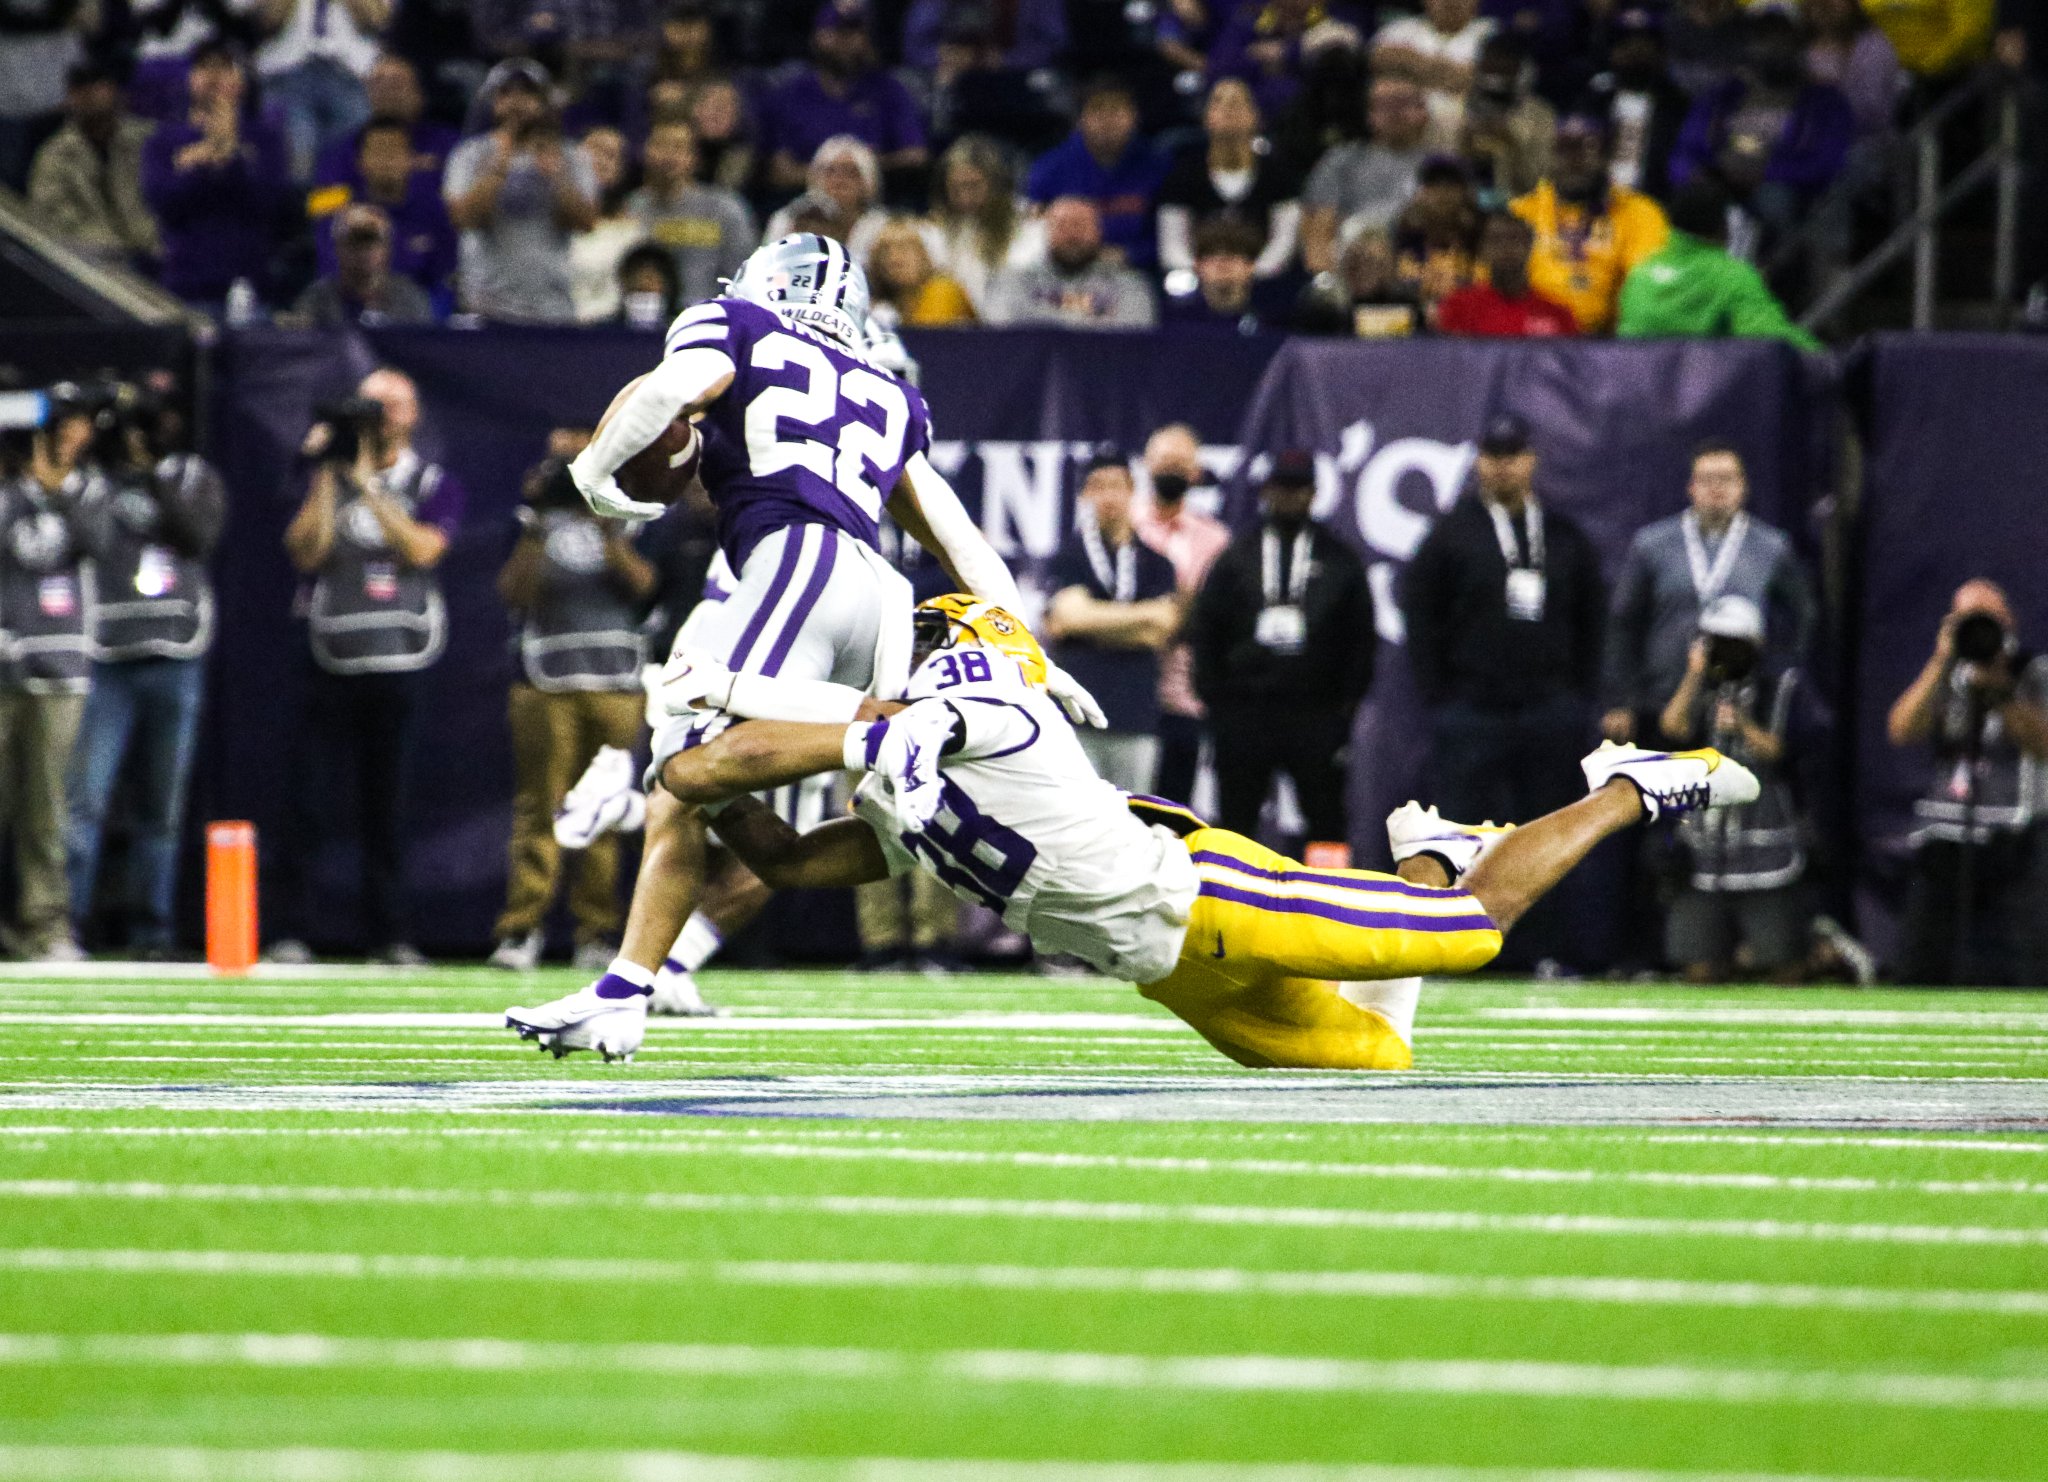 YOUNG TALENT SHINES IN 42-20 LSU LOSS